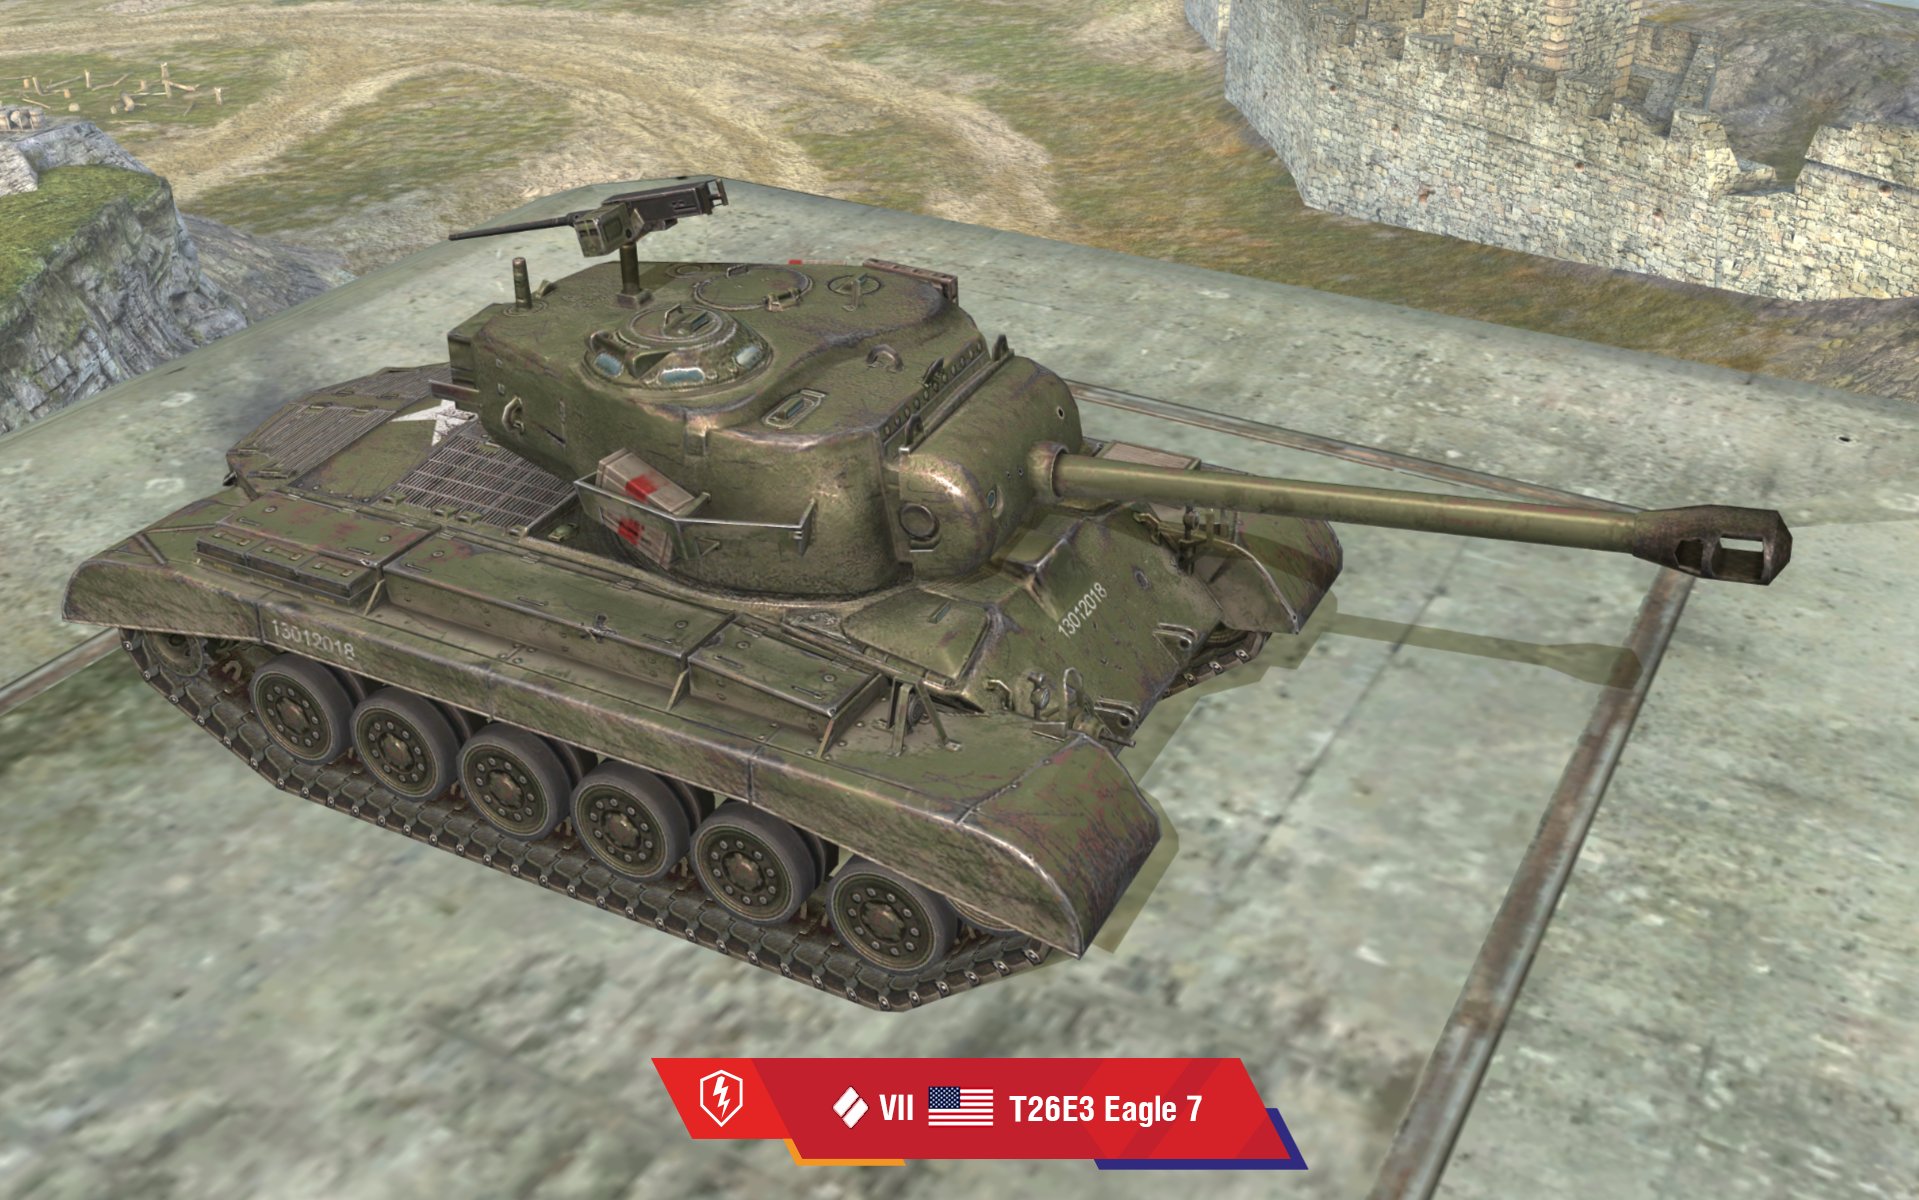 World Of Tanks Blitz New Tank Coming Soon American T26e3 Eagle 7 Medium Tank Back In 1945 This Real World M26 Pershing Prototype Participated In The Battle Of Cologne 75